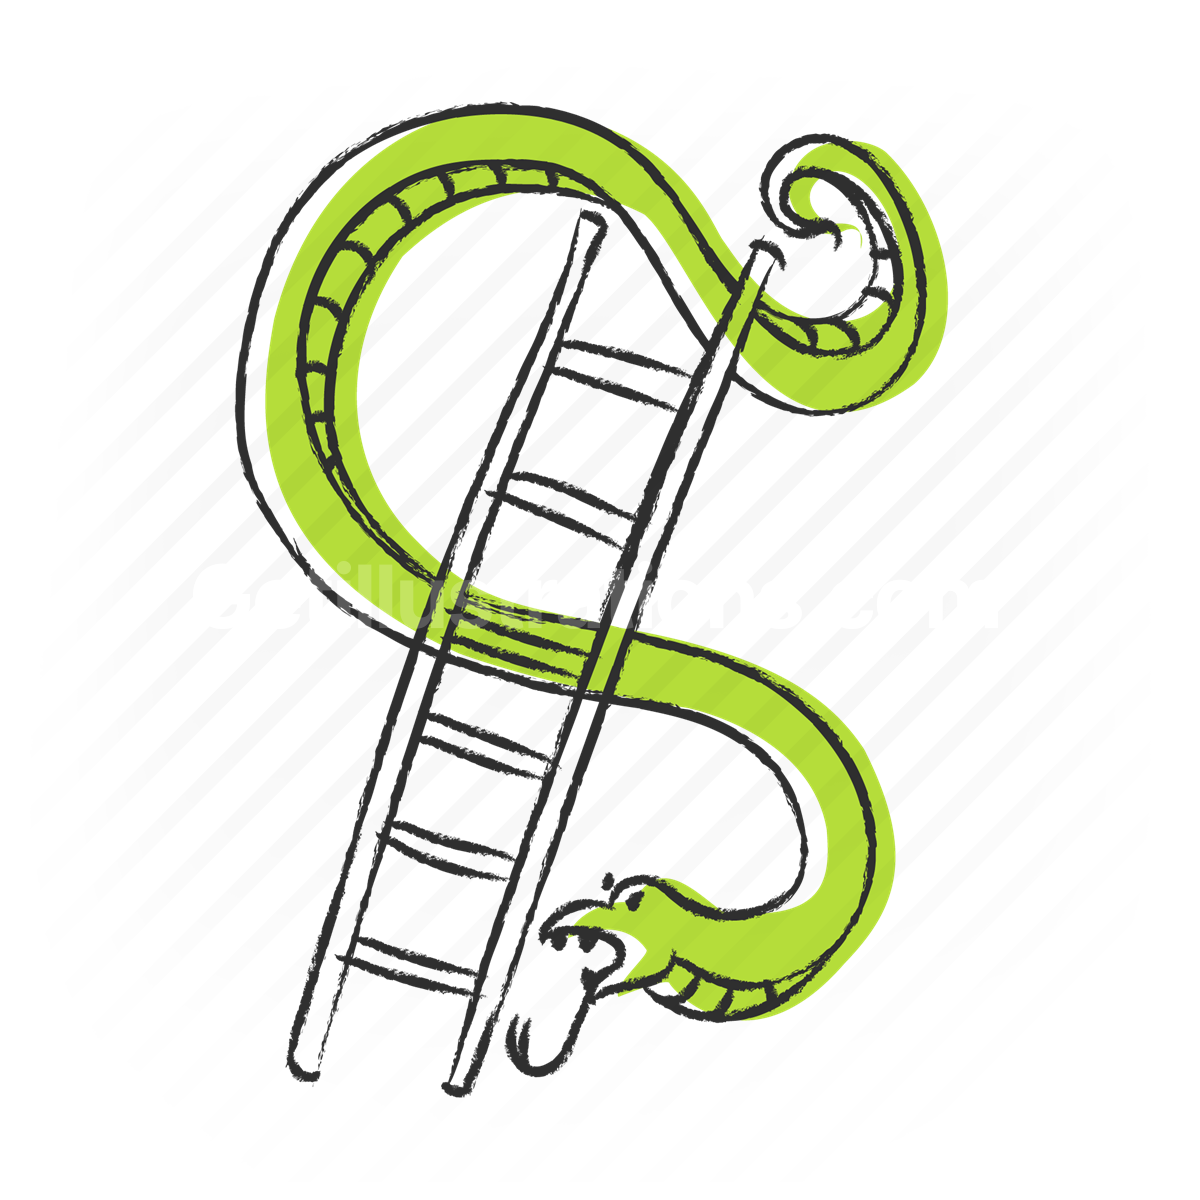 snakes, ladders, game, board game